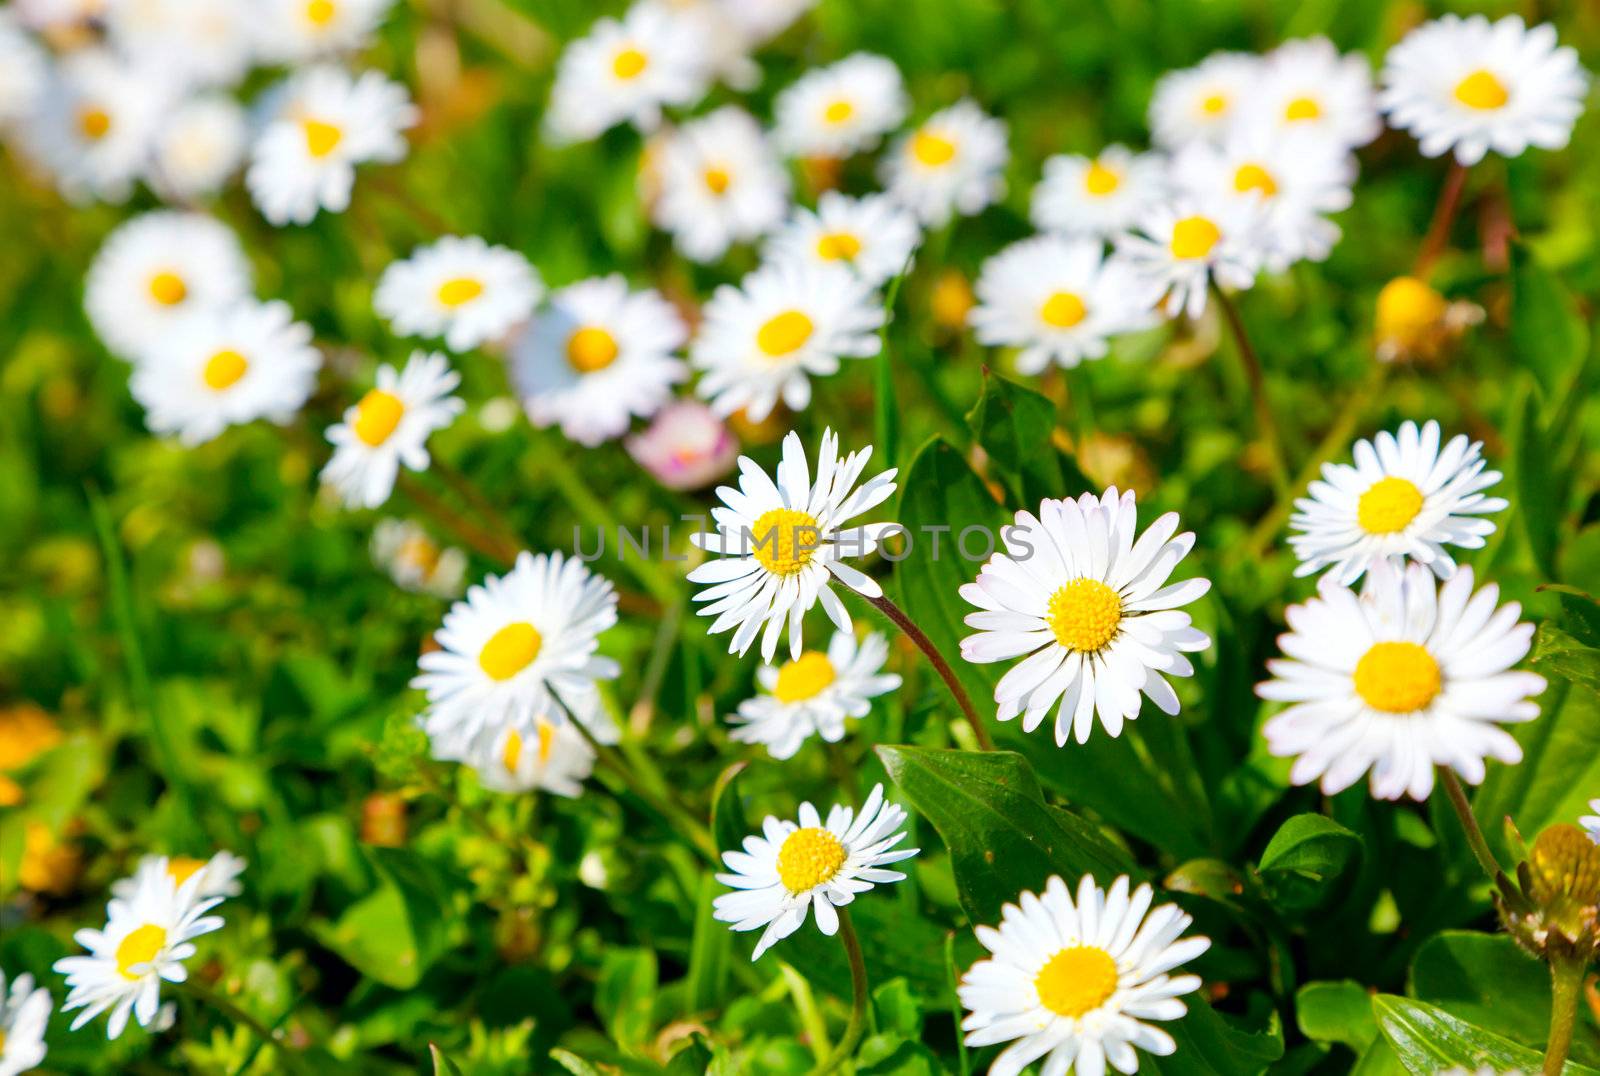 Daisies in a meadow, close-up 